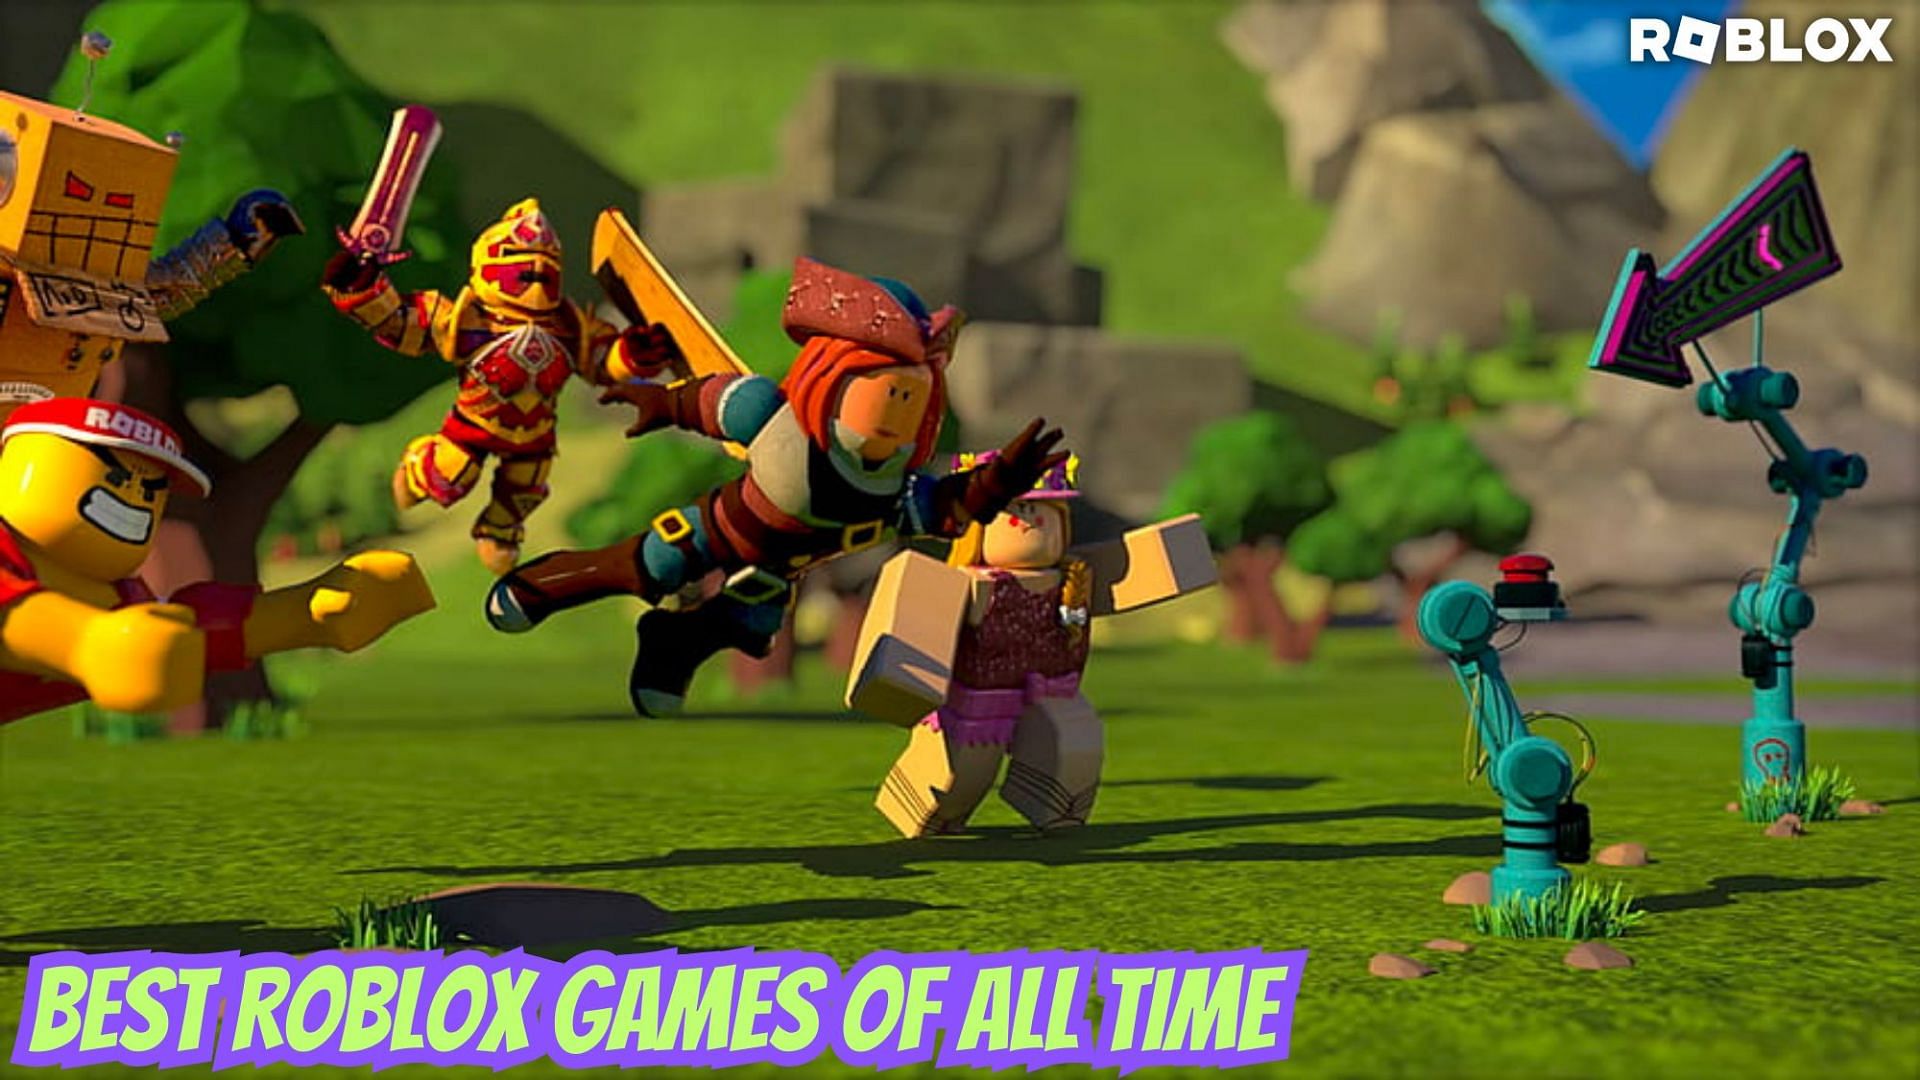  Roblox - PC Games & Accessories: Video Games